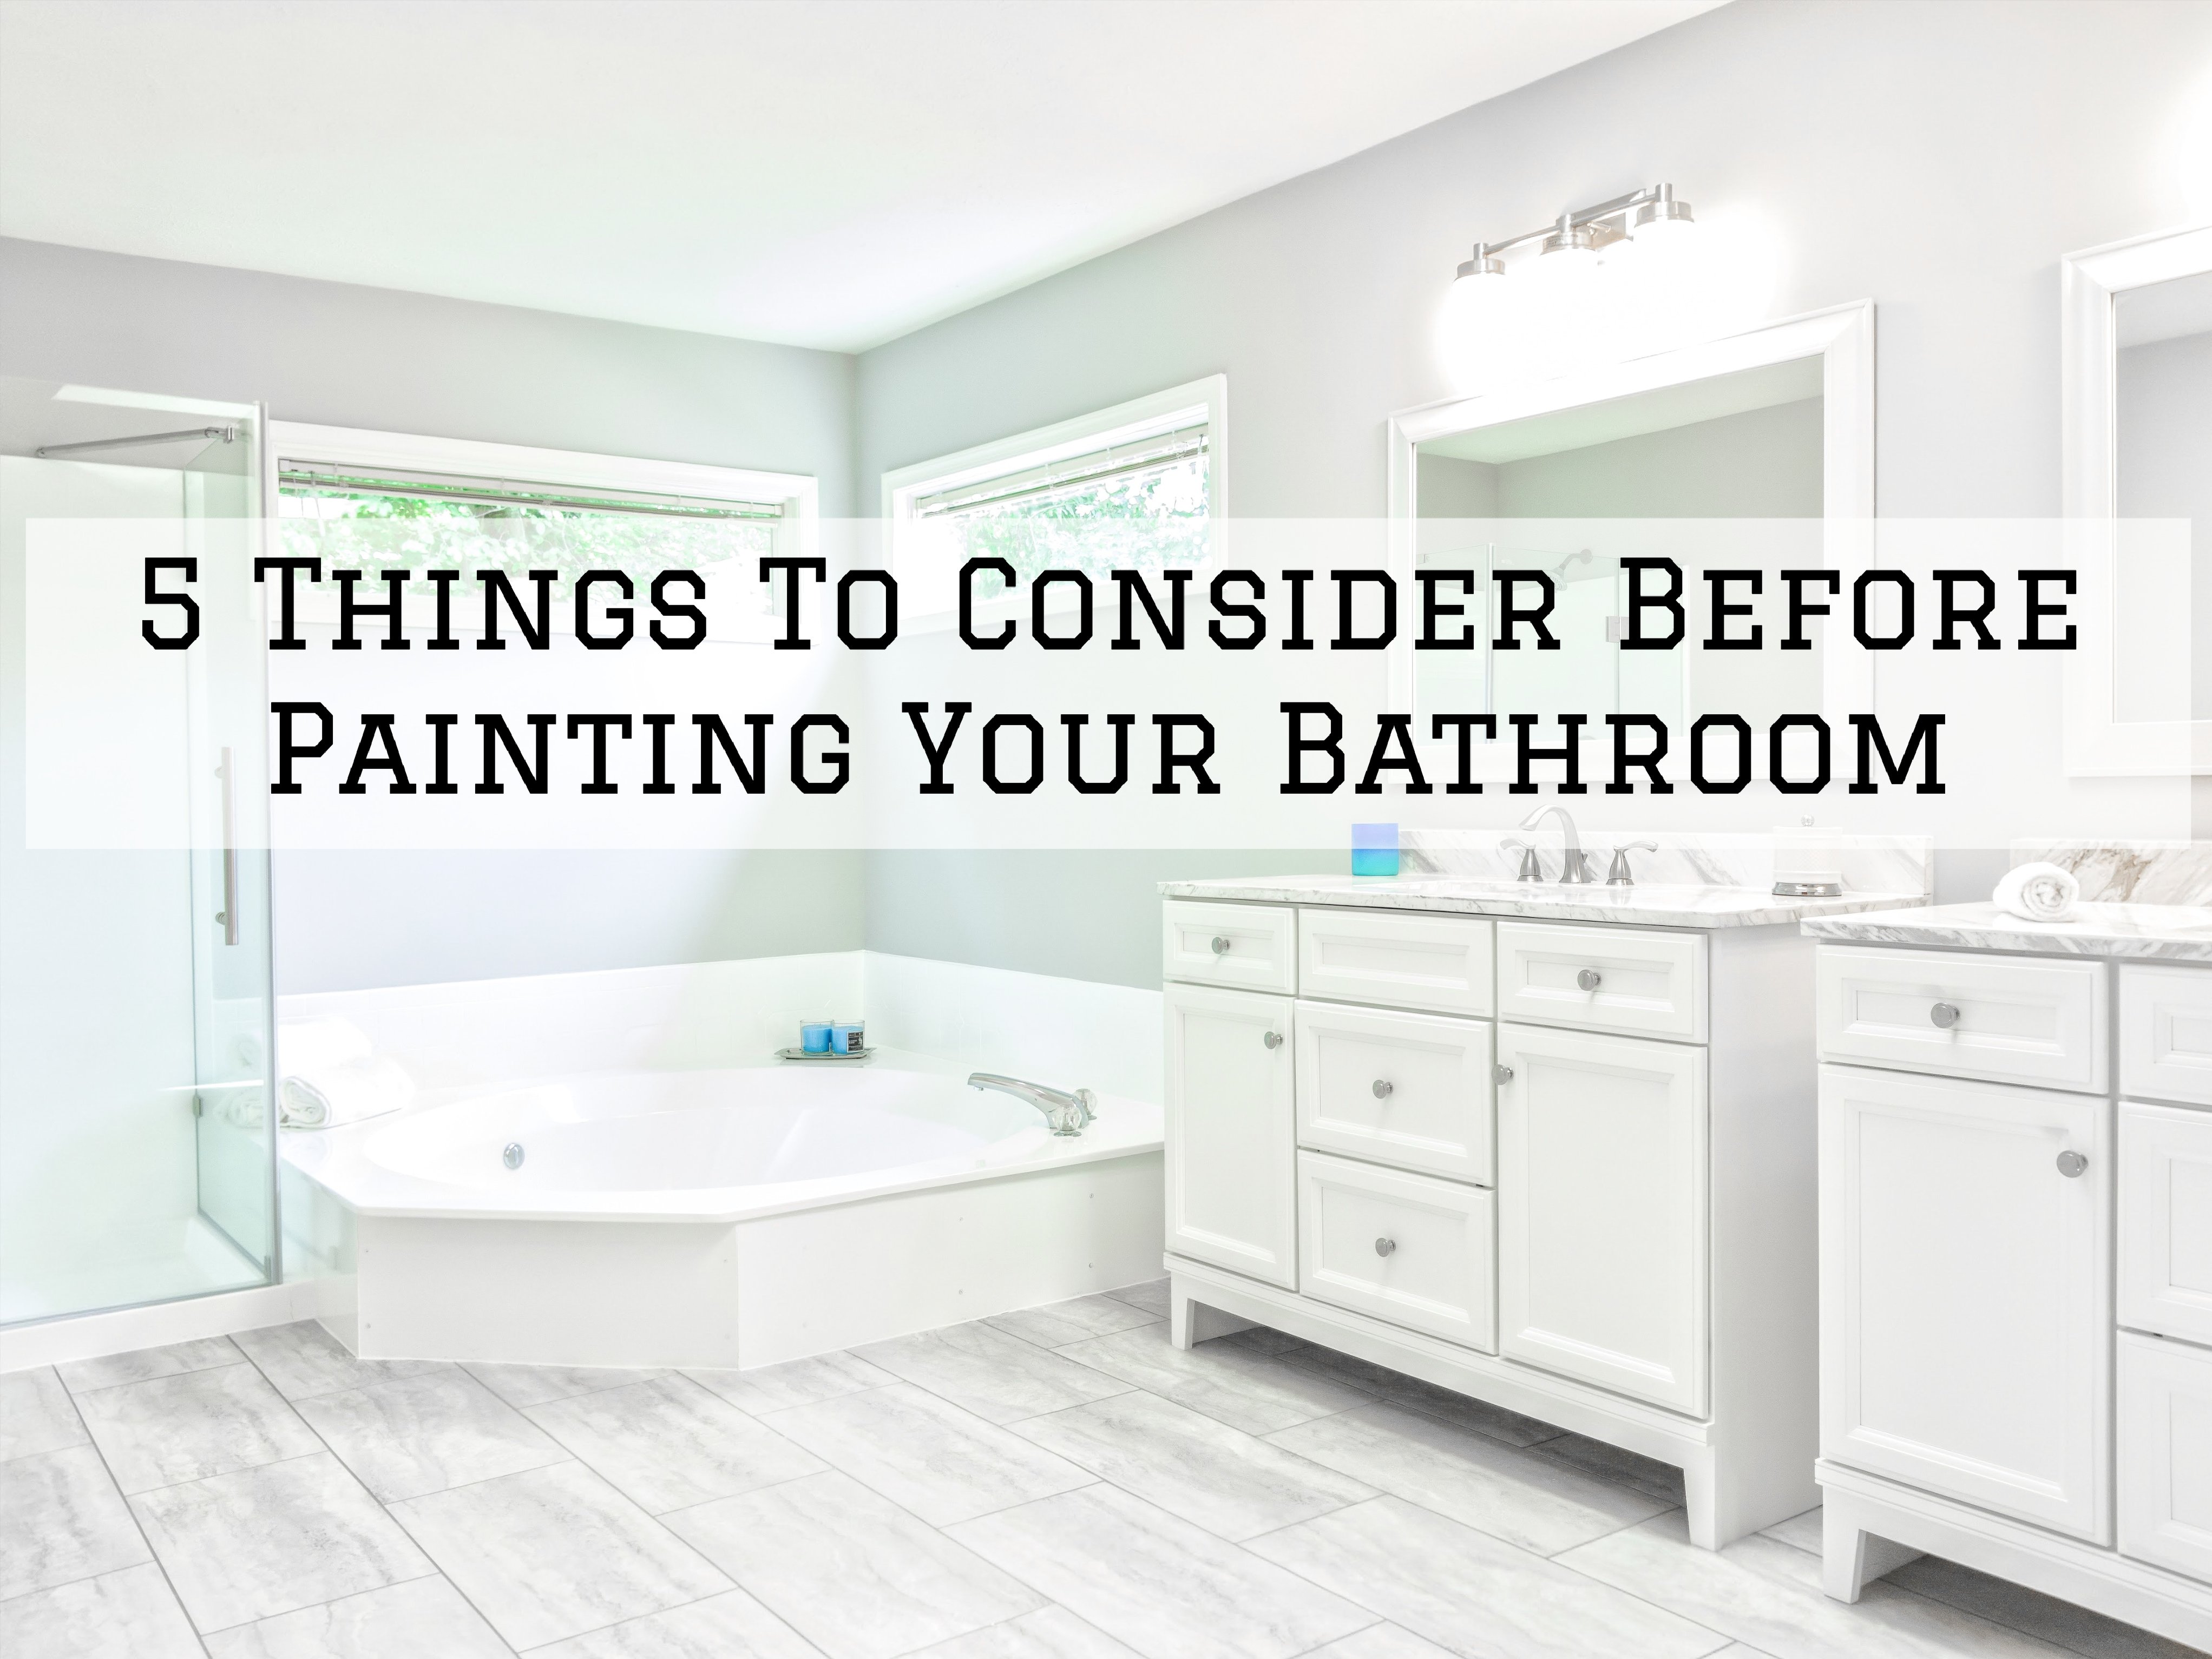 5 Things To Consider Before Painting Your Bathroom in Omaha, NE